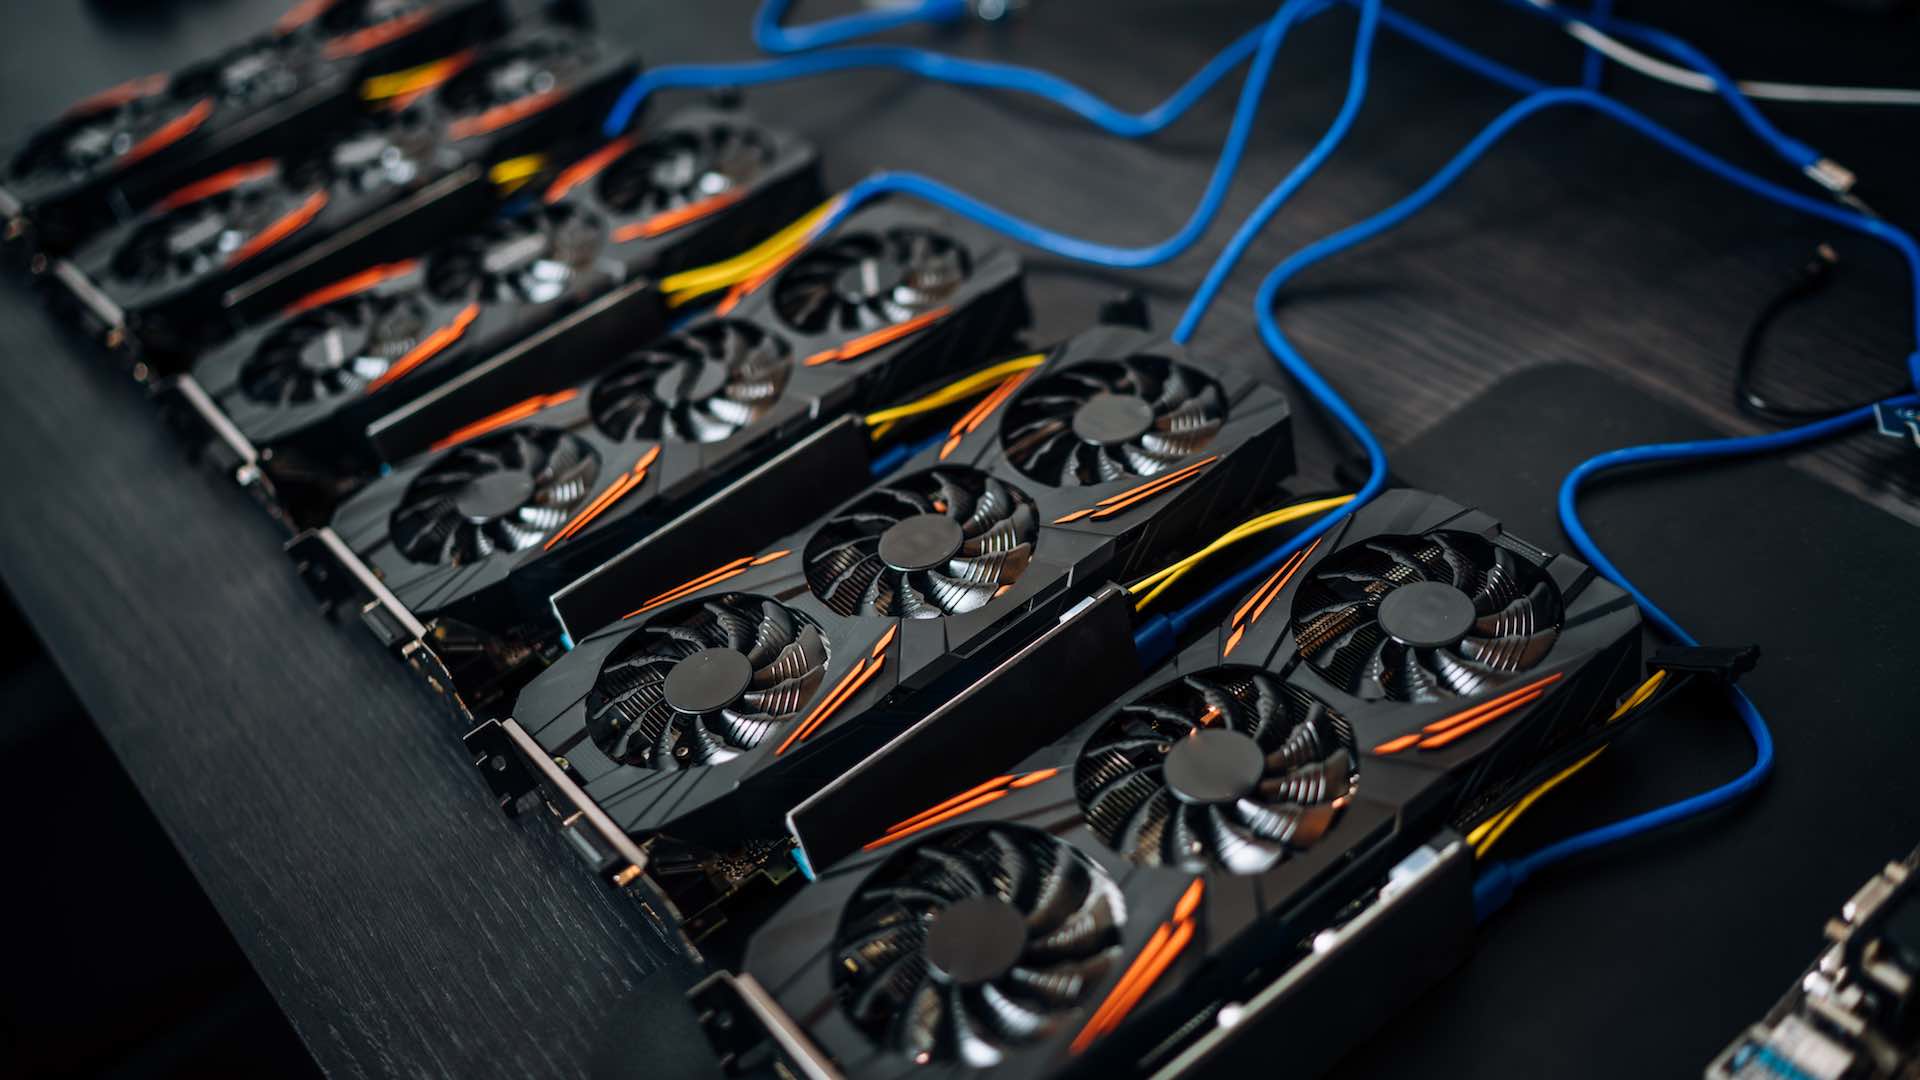 Cryptocurrency miners flee China as clampdown intensifies - Nikkei Asia